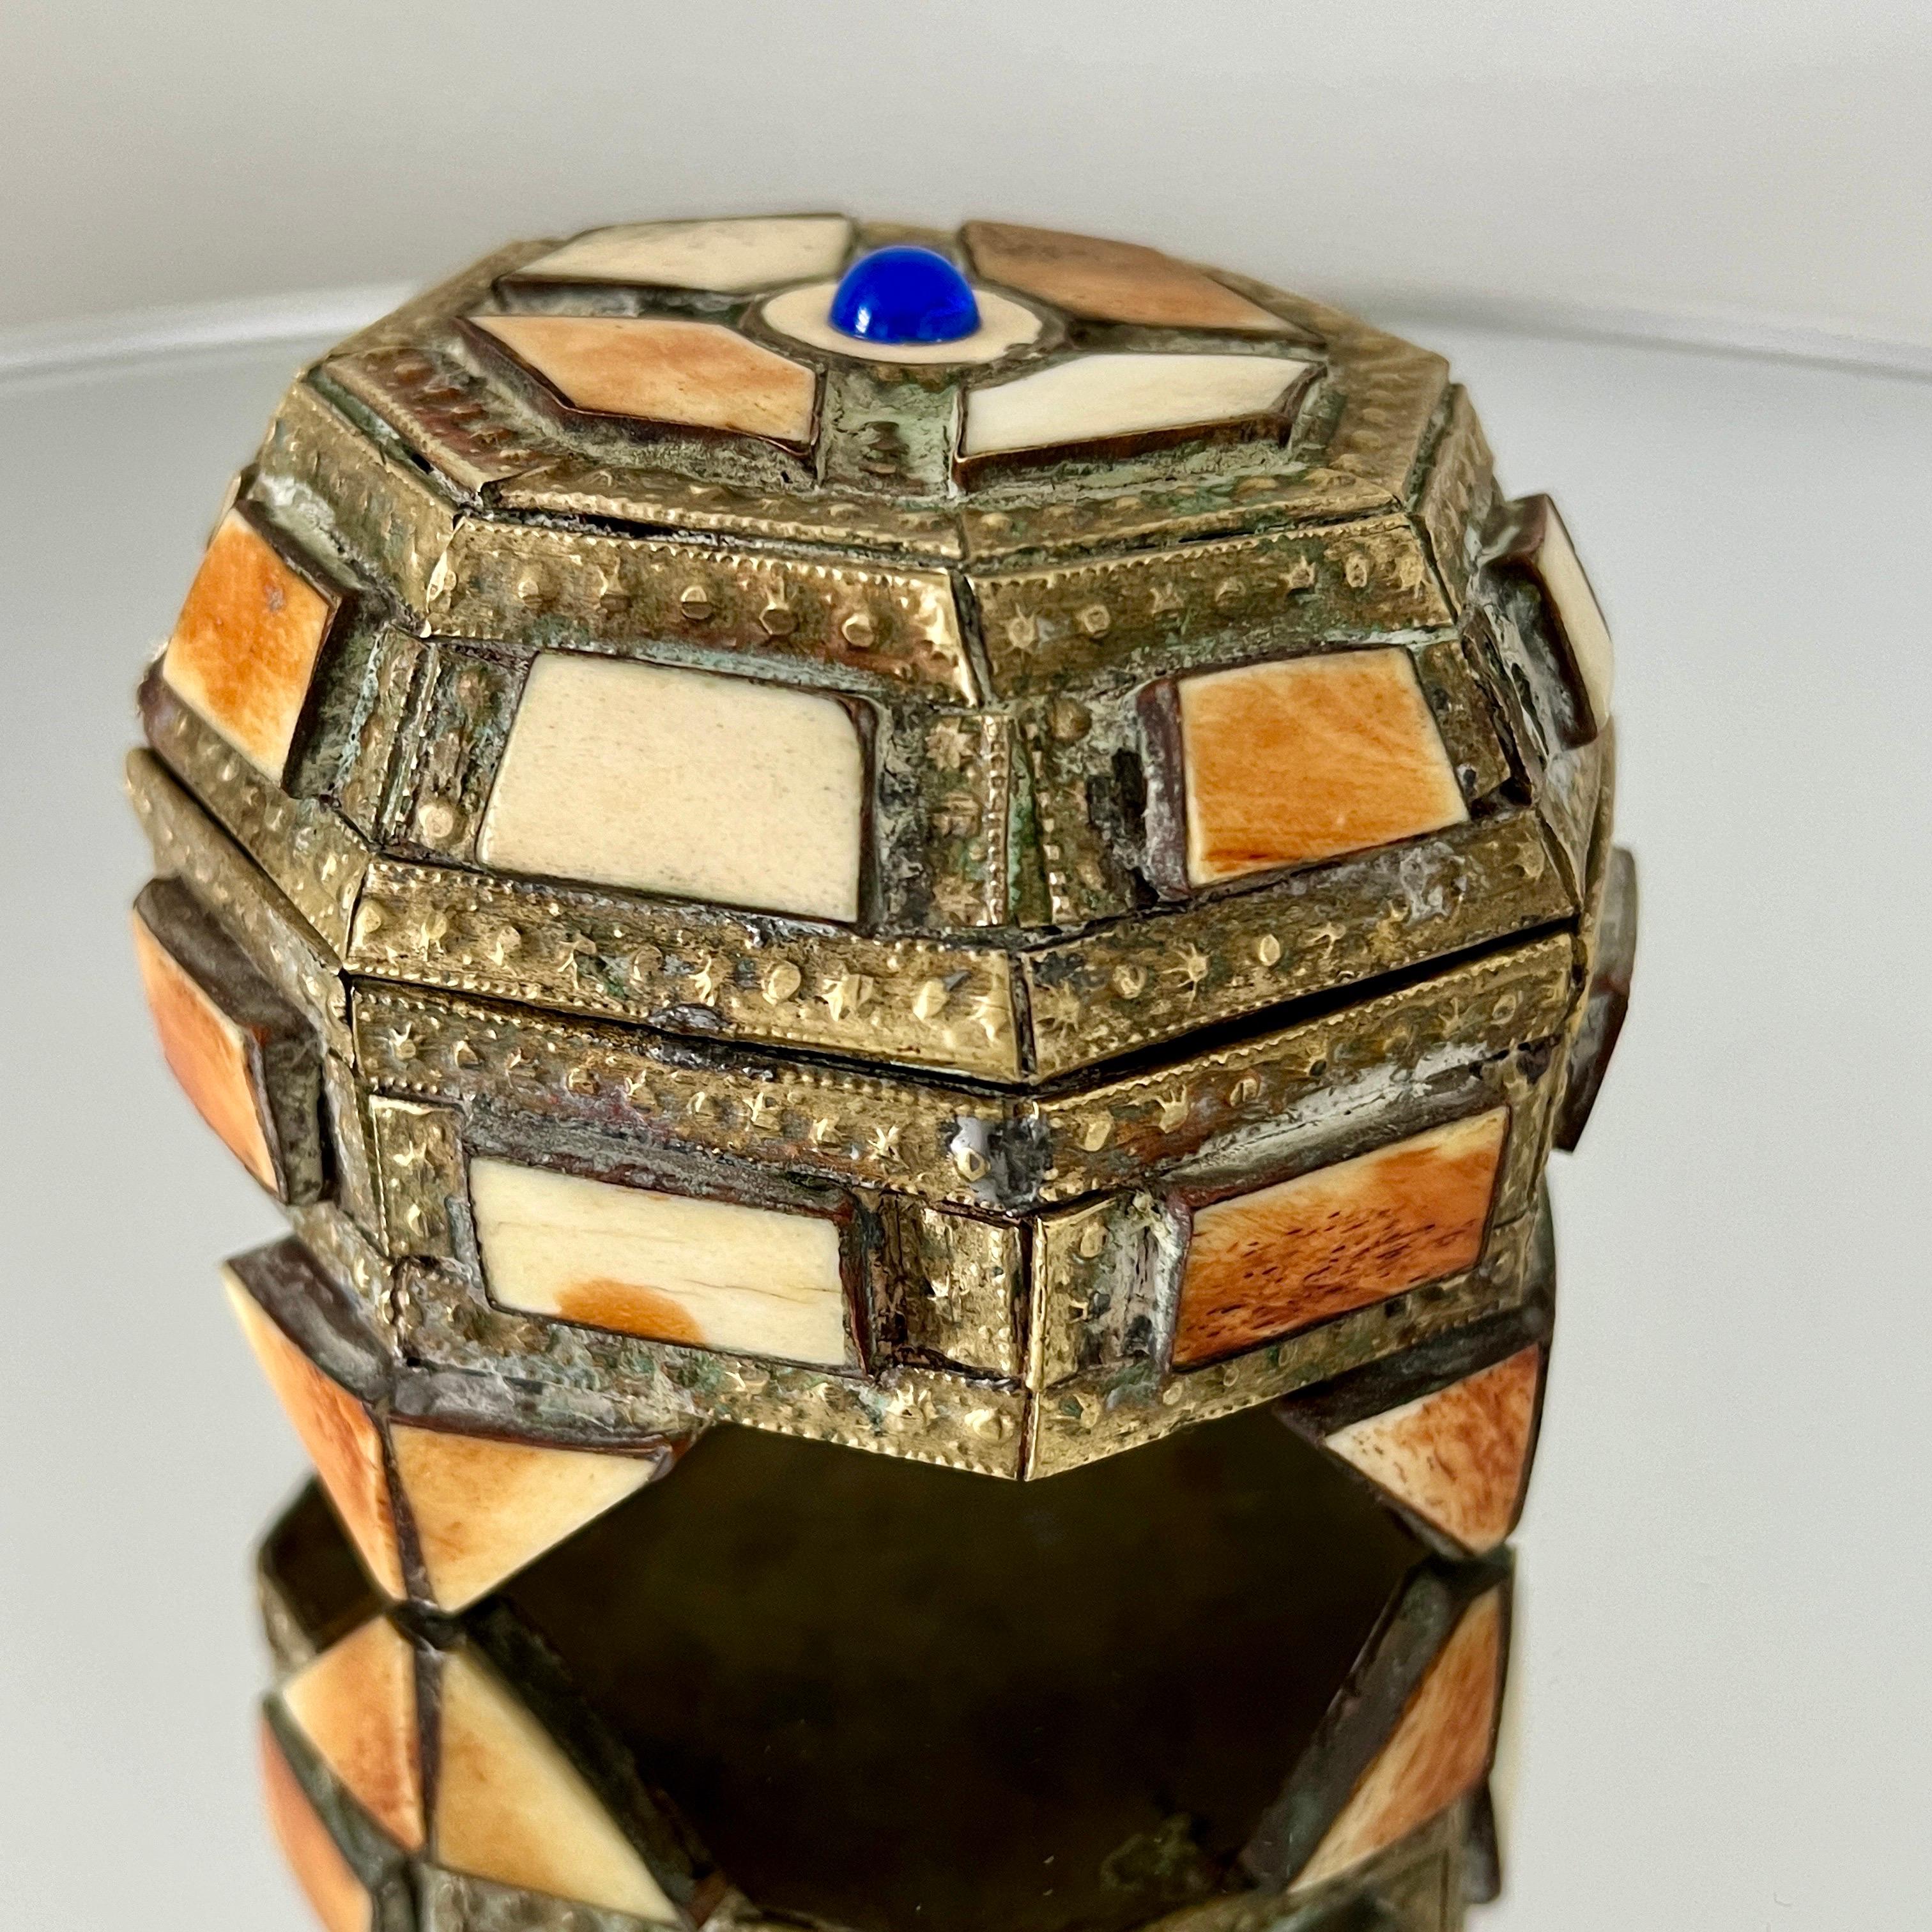 Moorish Geometric Trinket Box in Brass with Bone Inlay, Handcrafted in Morocco, 1970's For Sale